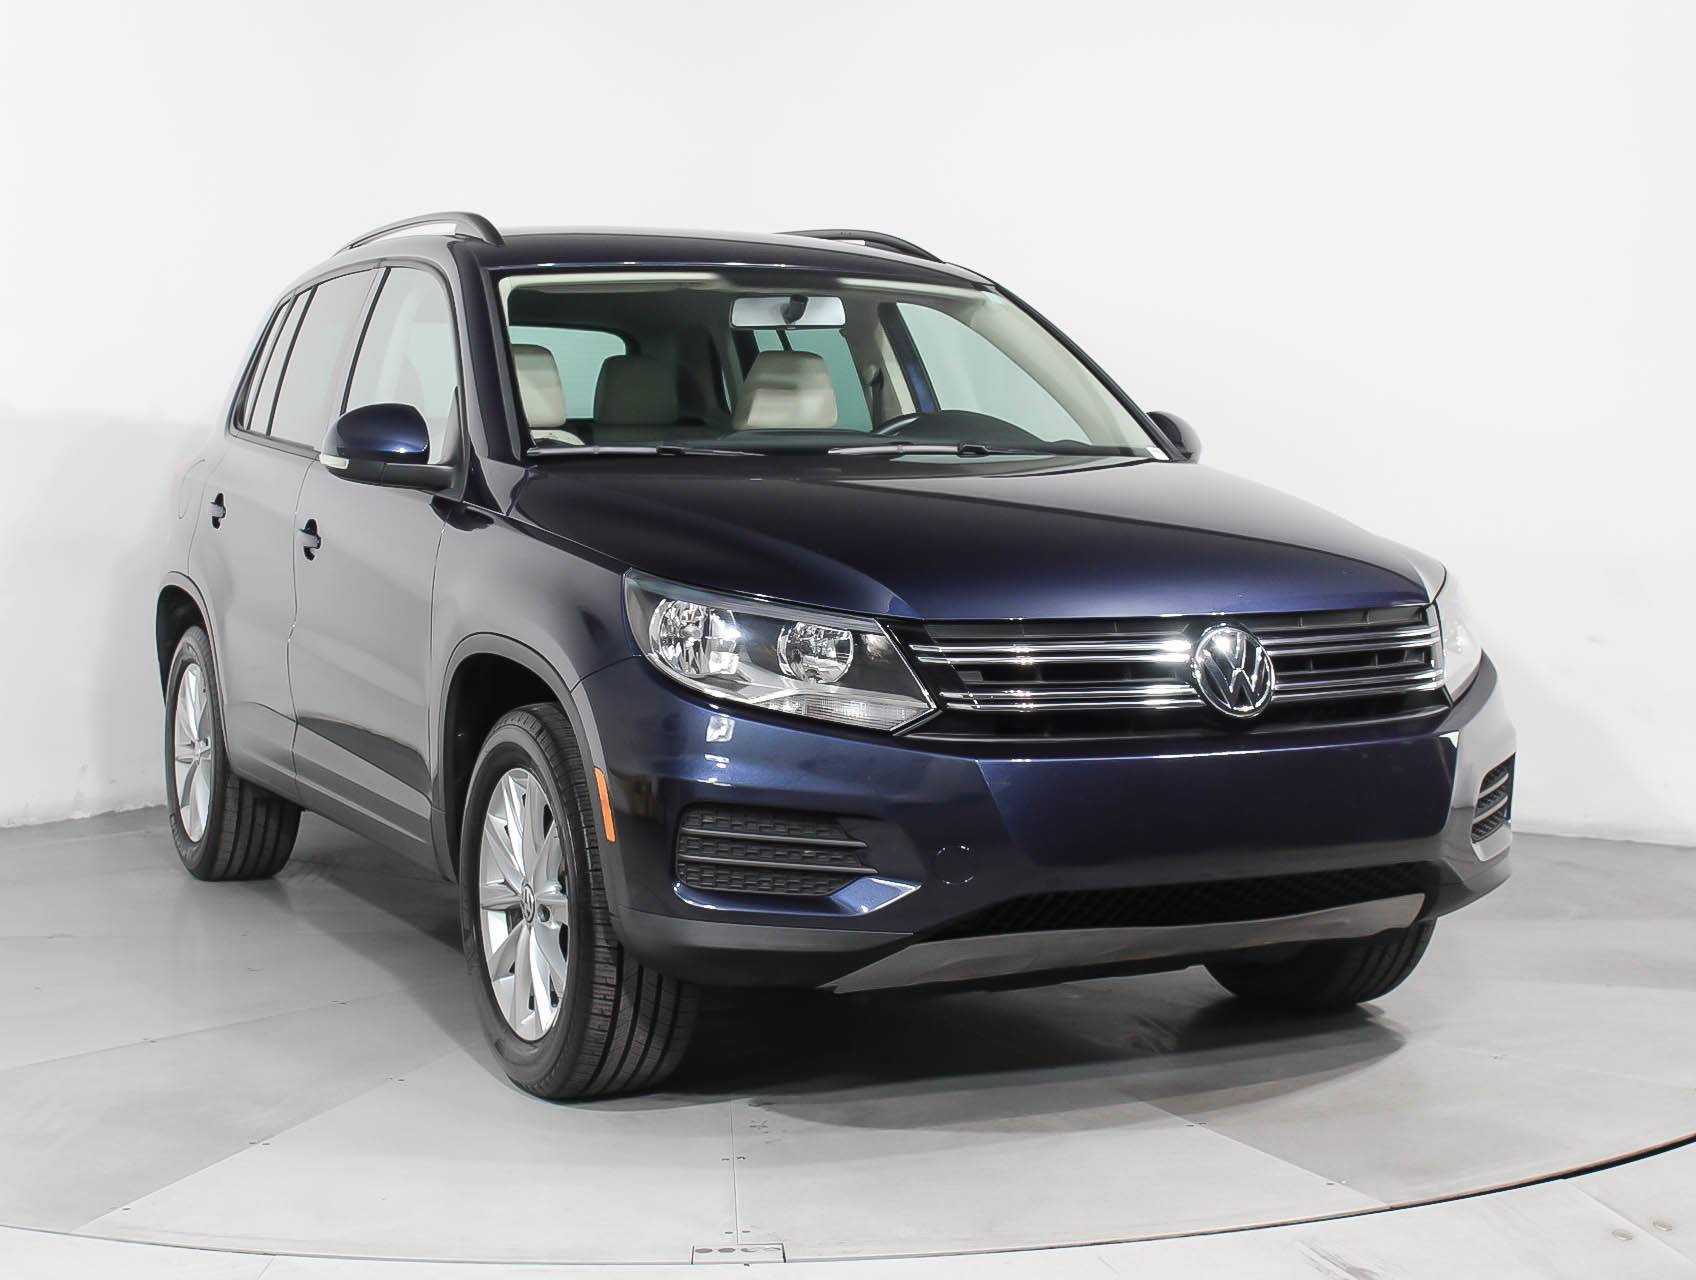 Florida Fine Cars - Used VOLKSWAGEN TIGUAN 2015 HOLLYWOOD S